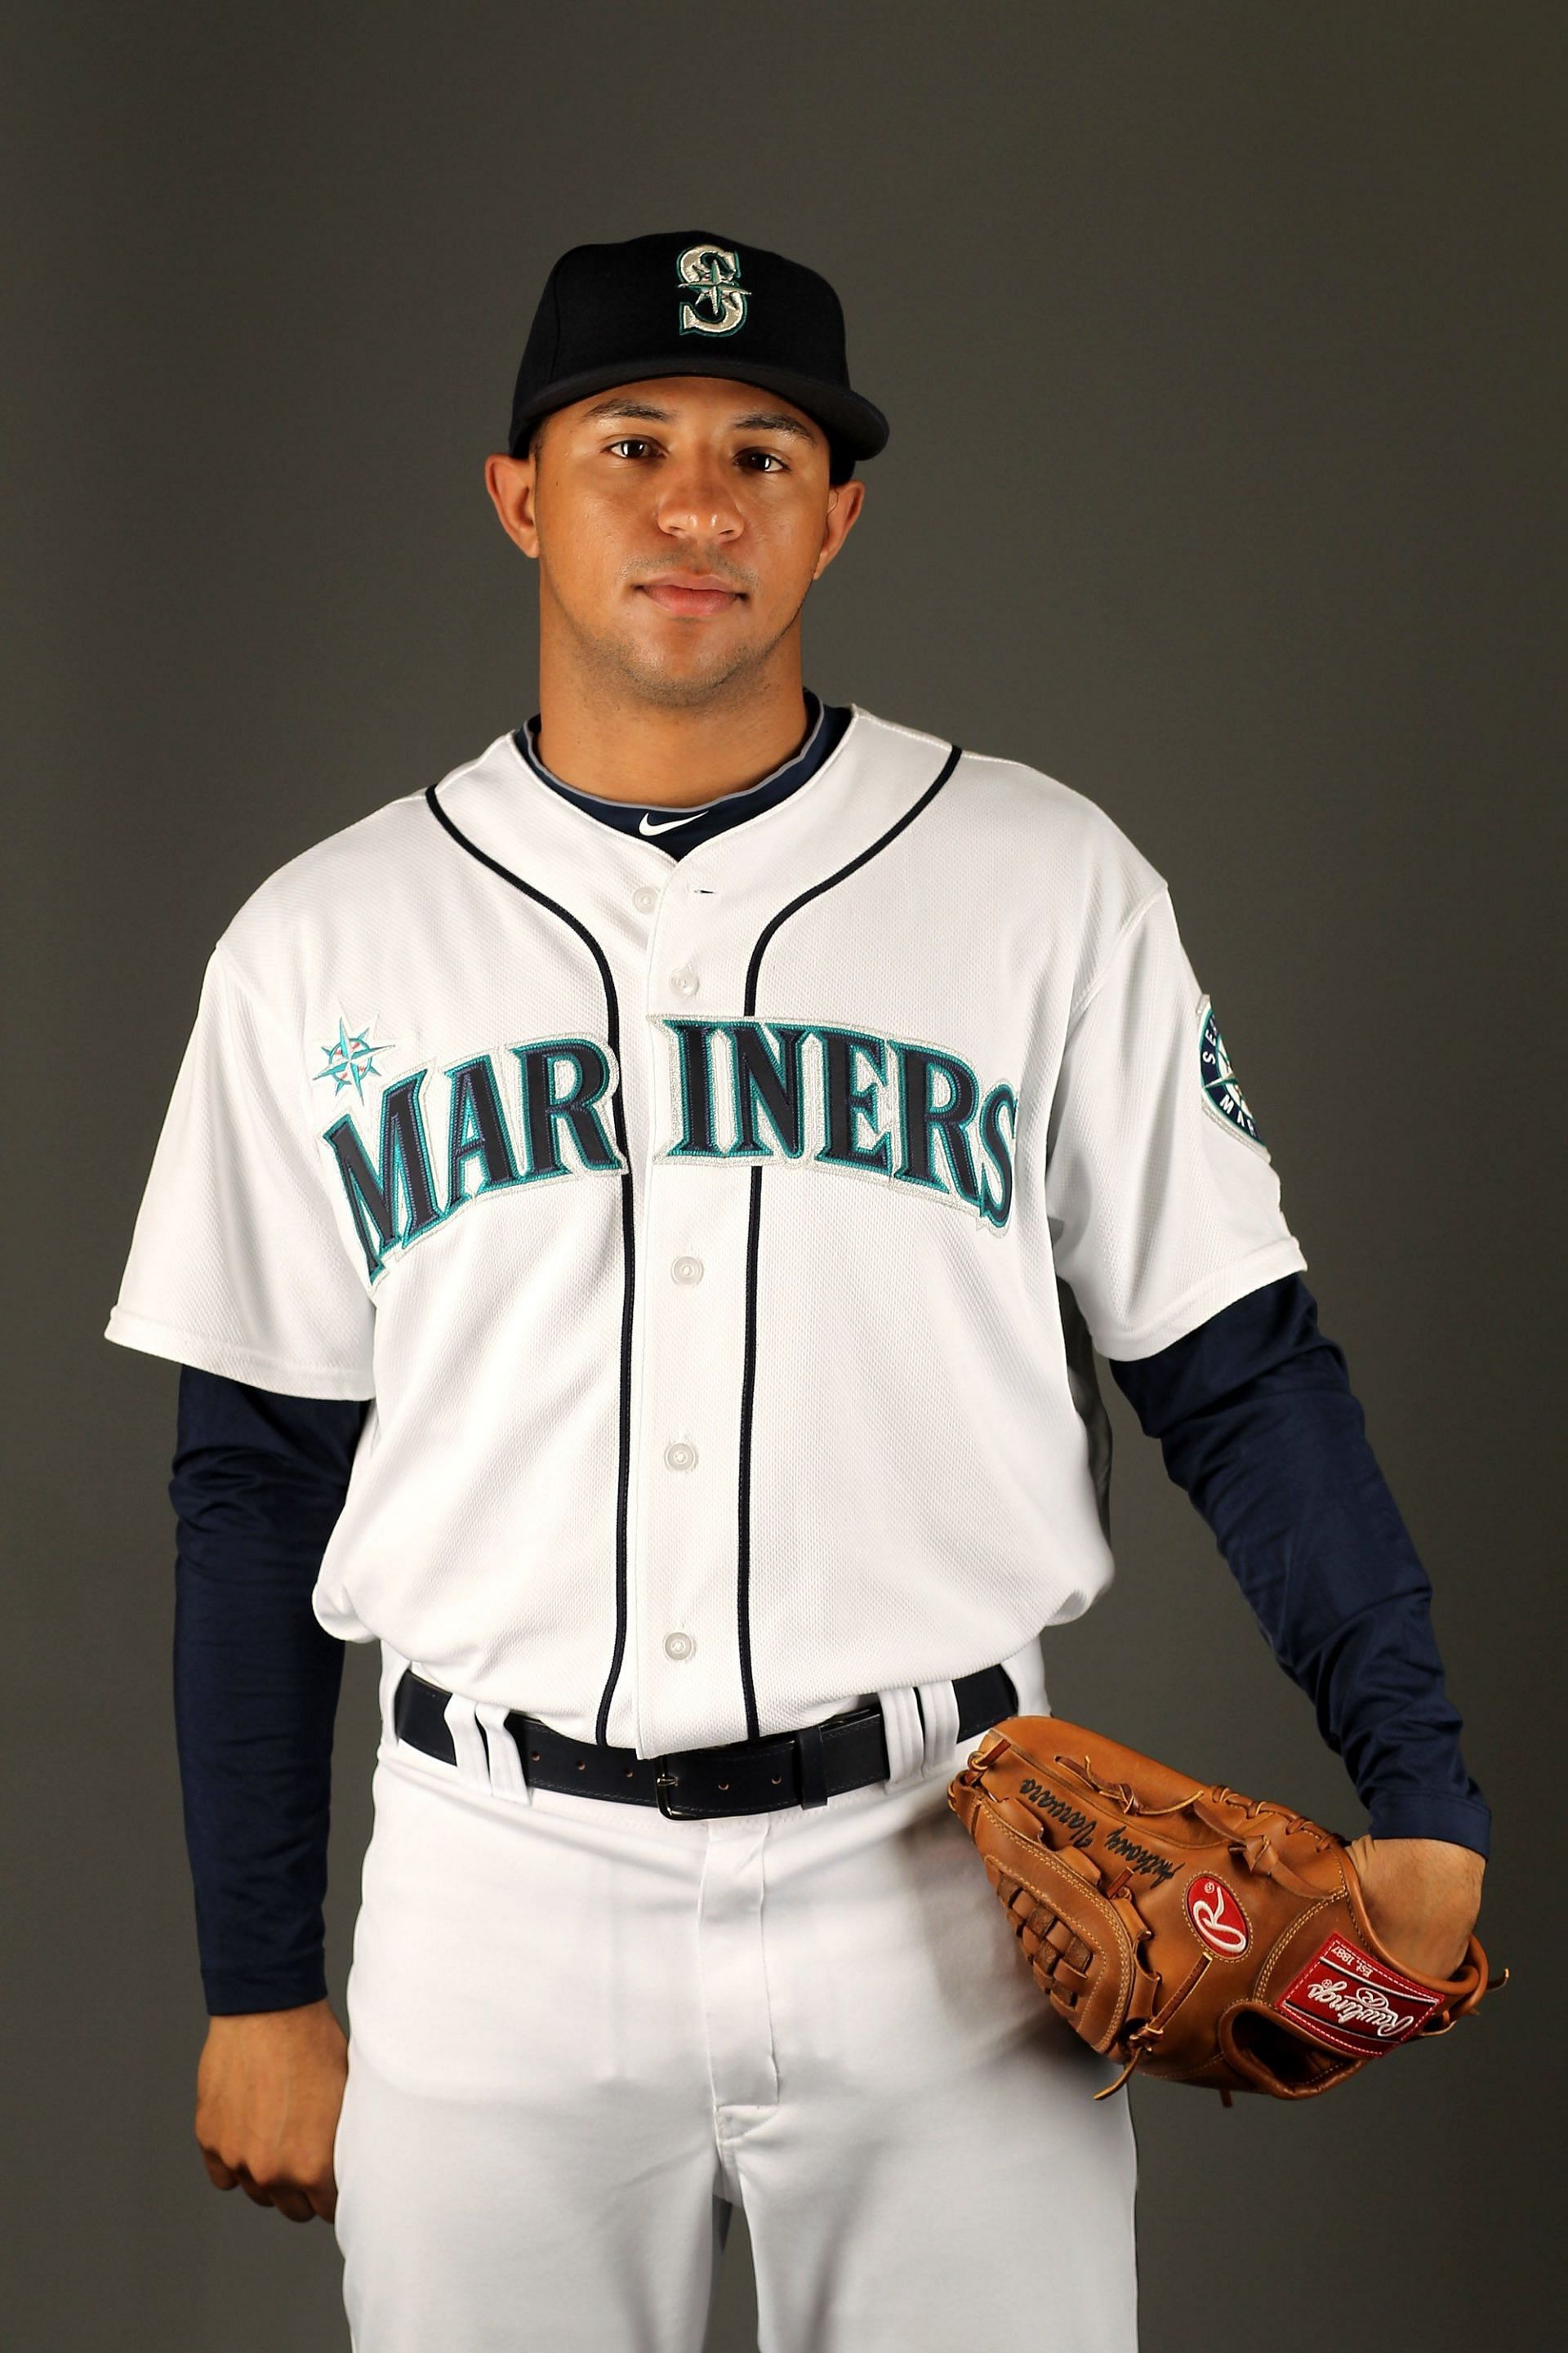 Varvaro made his debut on September 24, 2010, for the Seattle Mariners